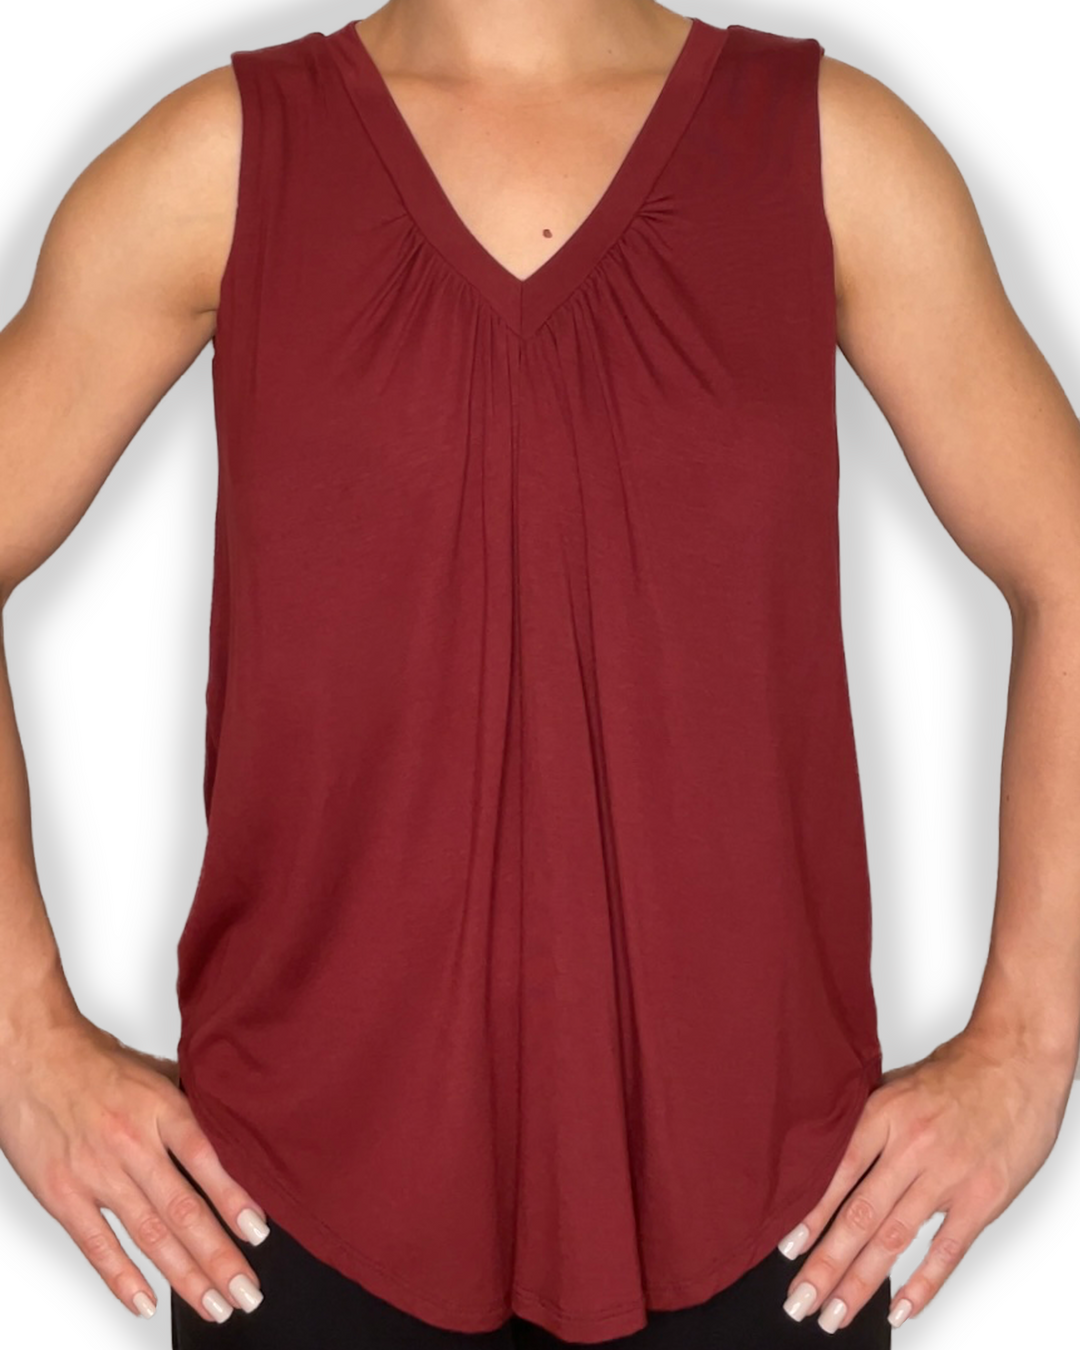 Jia+Kate braless bamboo top in maroon color Ashley style front